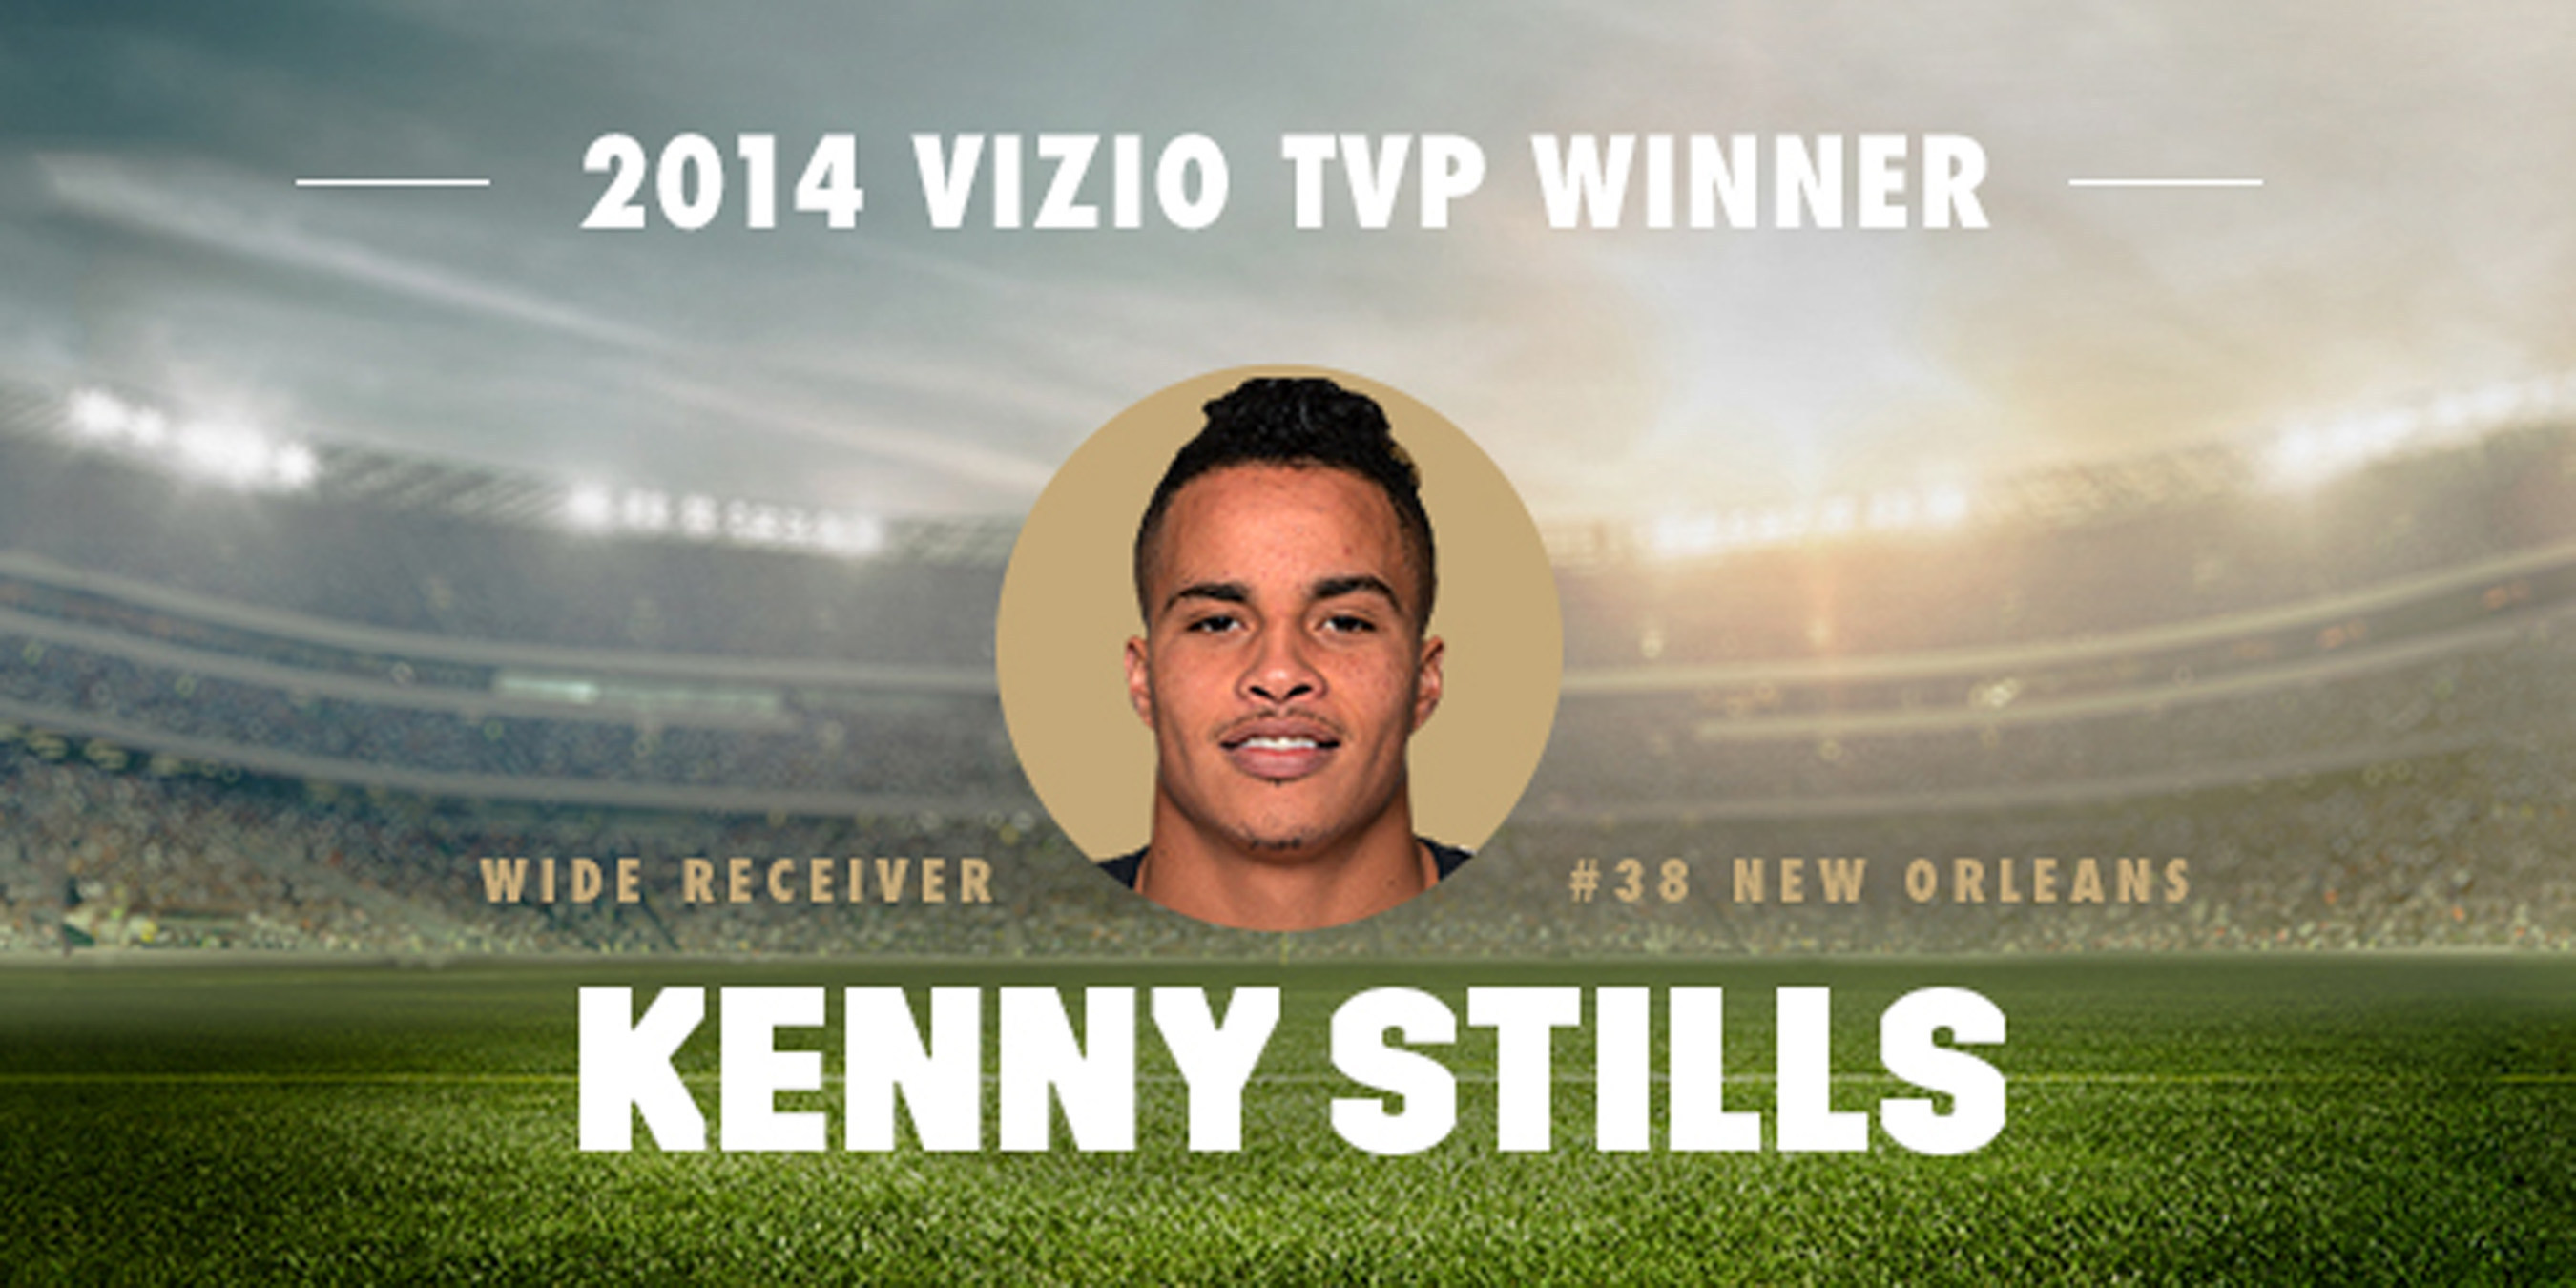 Fans Select New Orleans Wide Receiver Kenny Stills As 8th Annual VIZIO "Top Value Performer." Stills Clinches Honors with Fan Votes for 2014 On-Field Performance.